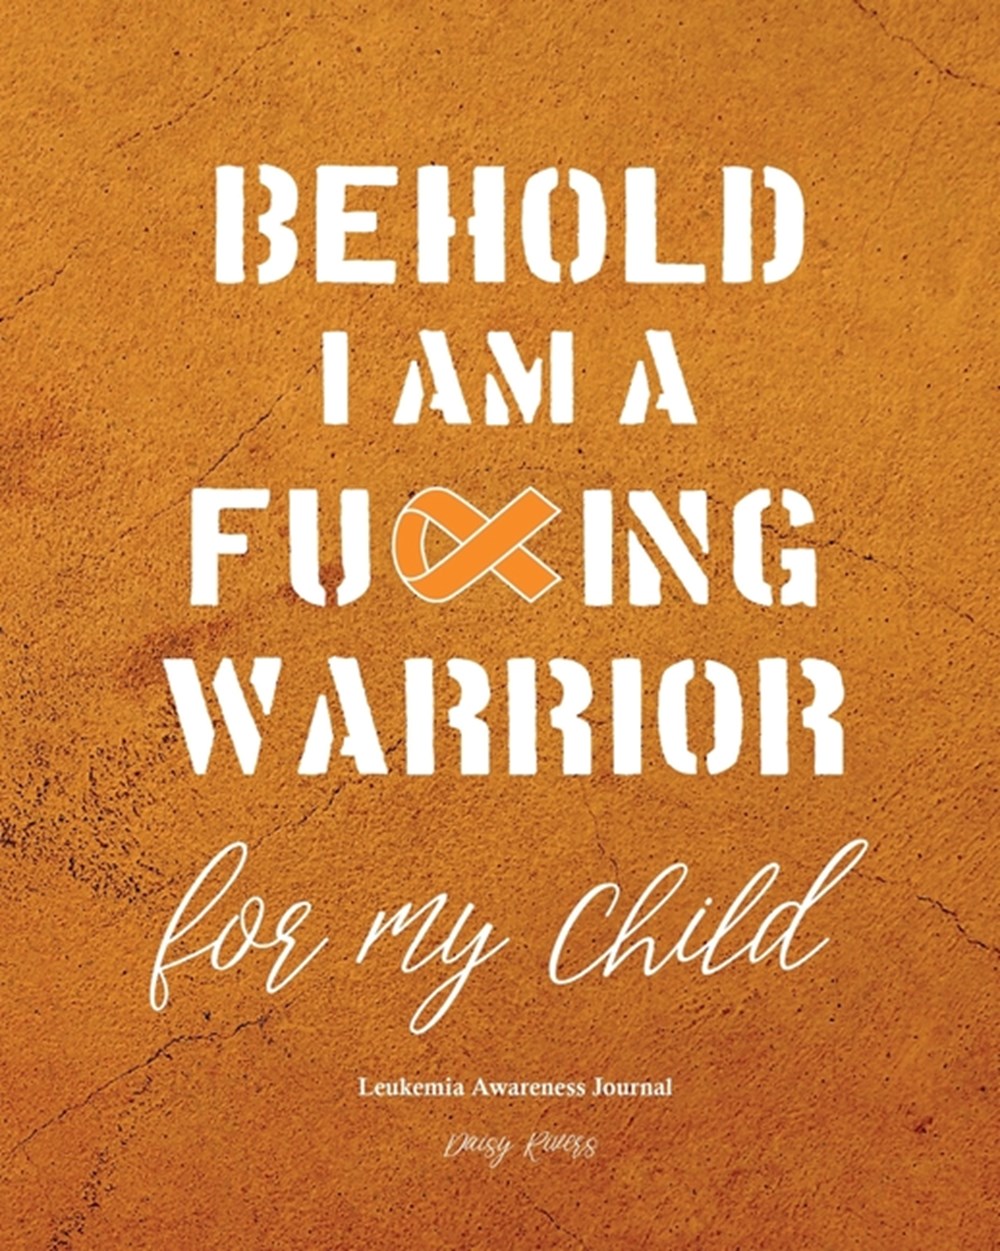 Leukemia Awareness Journal Behold I Am A Cancer Warrior For My Mom, Son and Daughter, Fighter's Diar